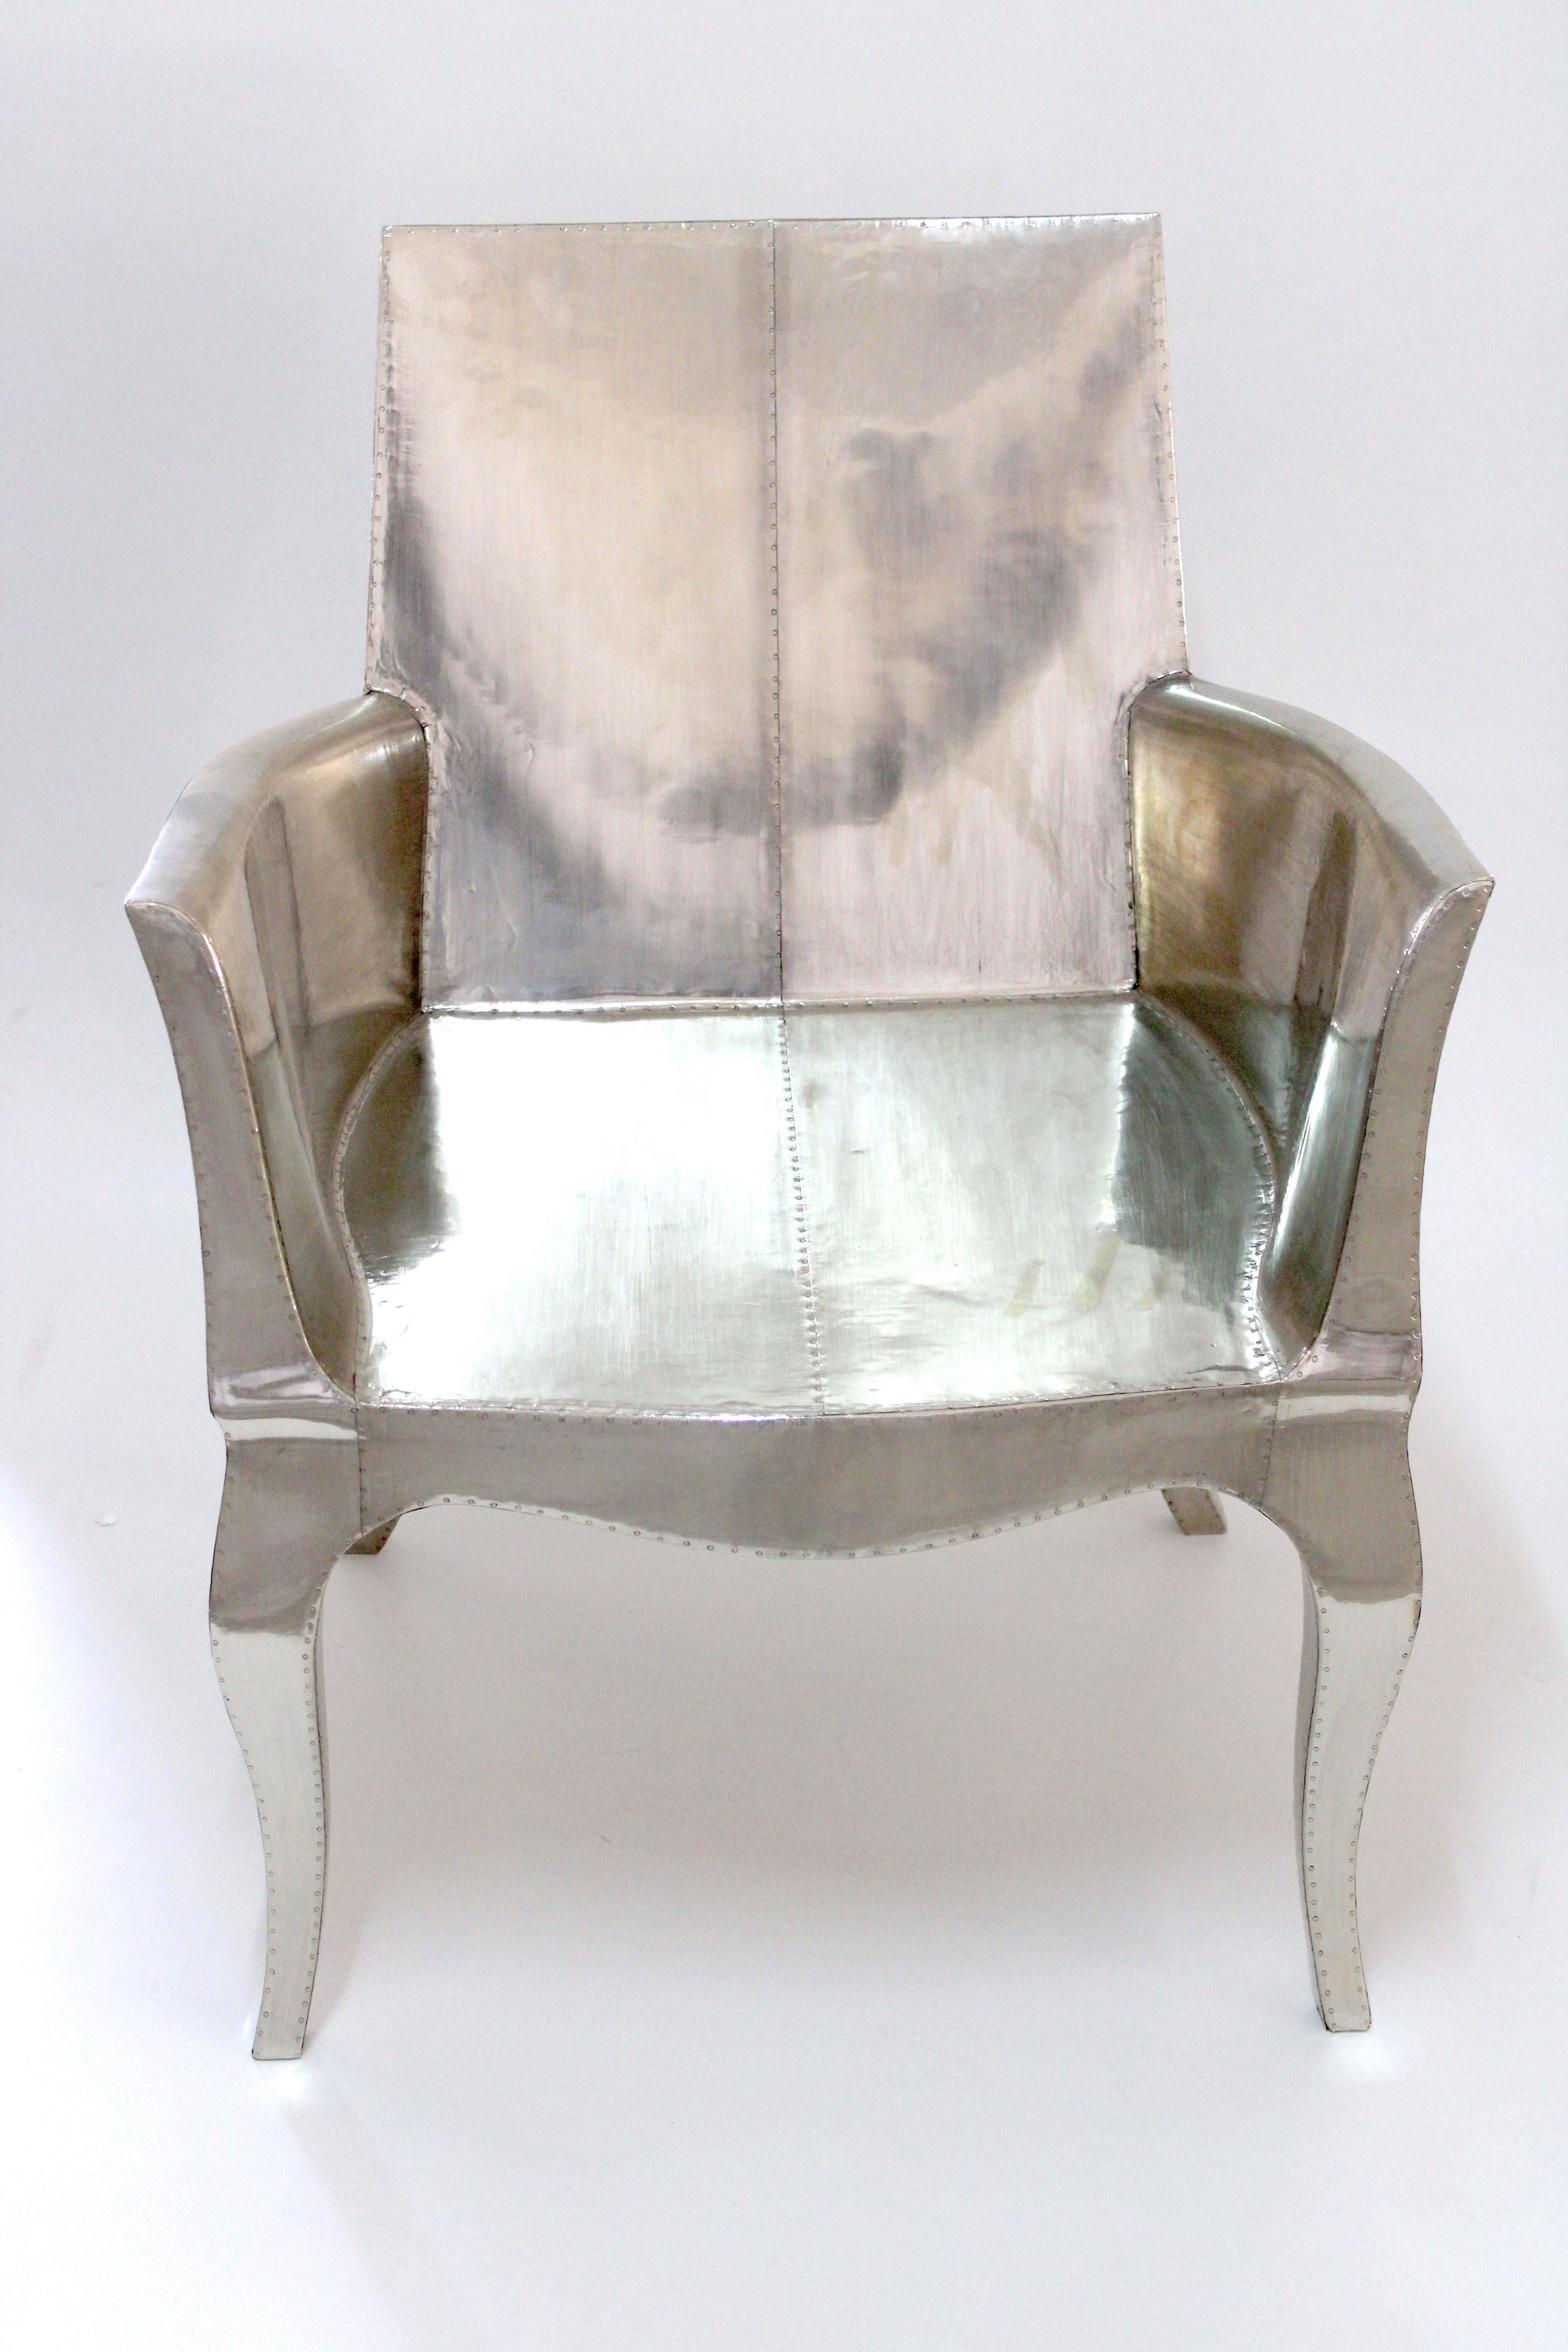 Teak Art Deco Style Chairs in Smooth White Bronze by Paul Mathieu for S. Odegard For Sale